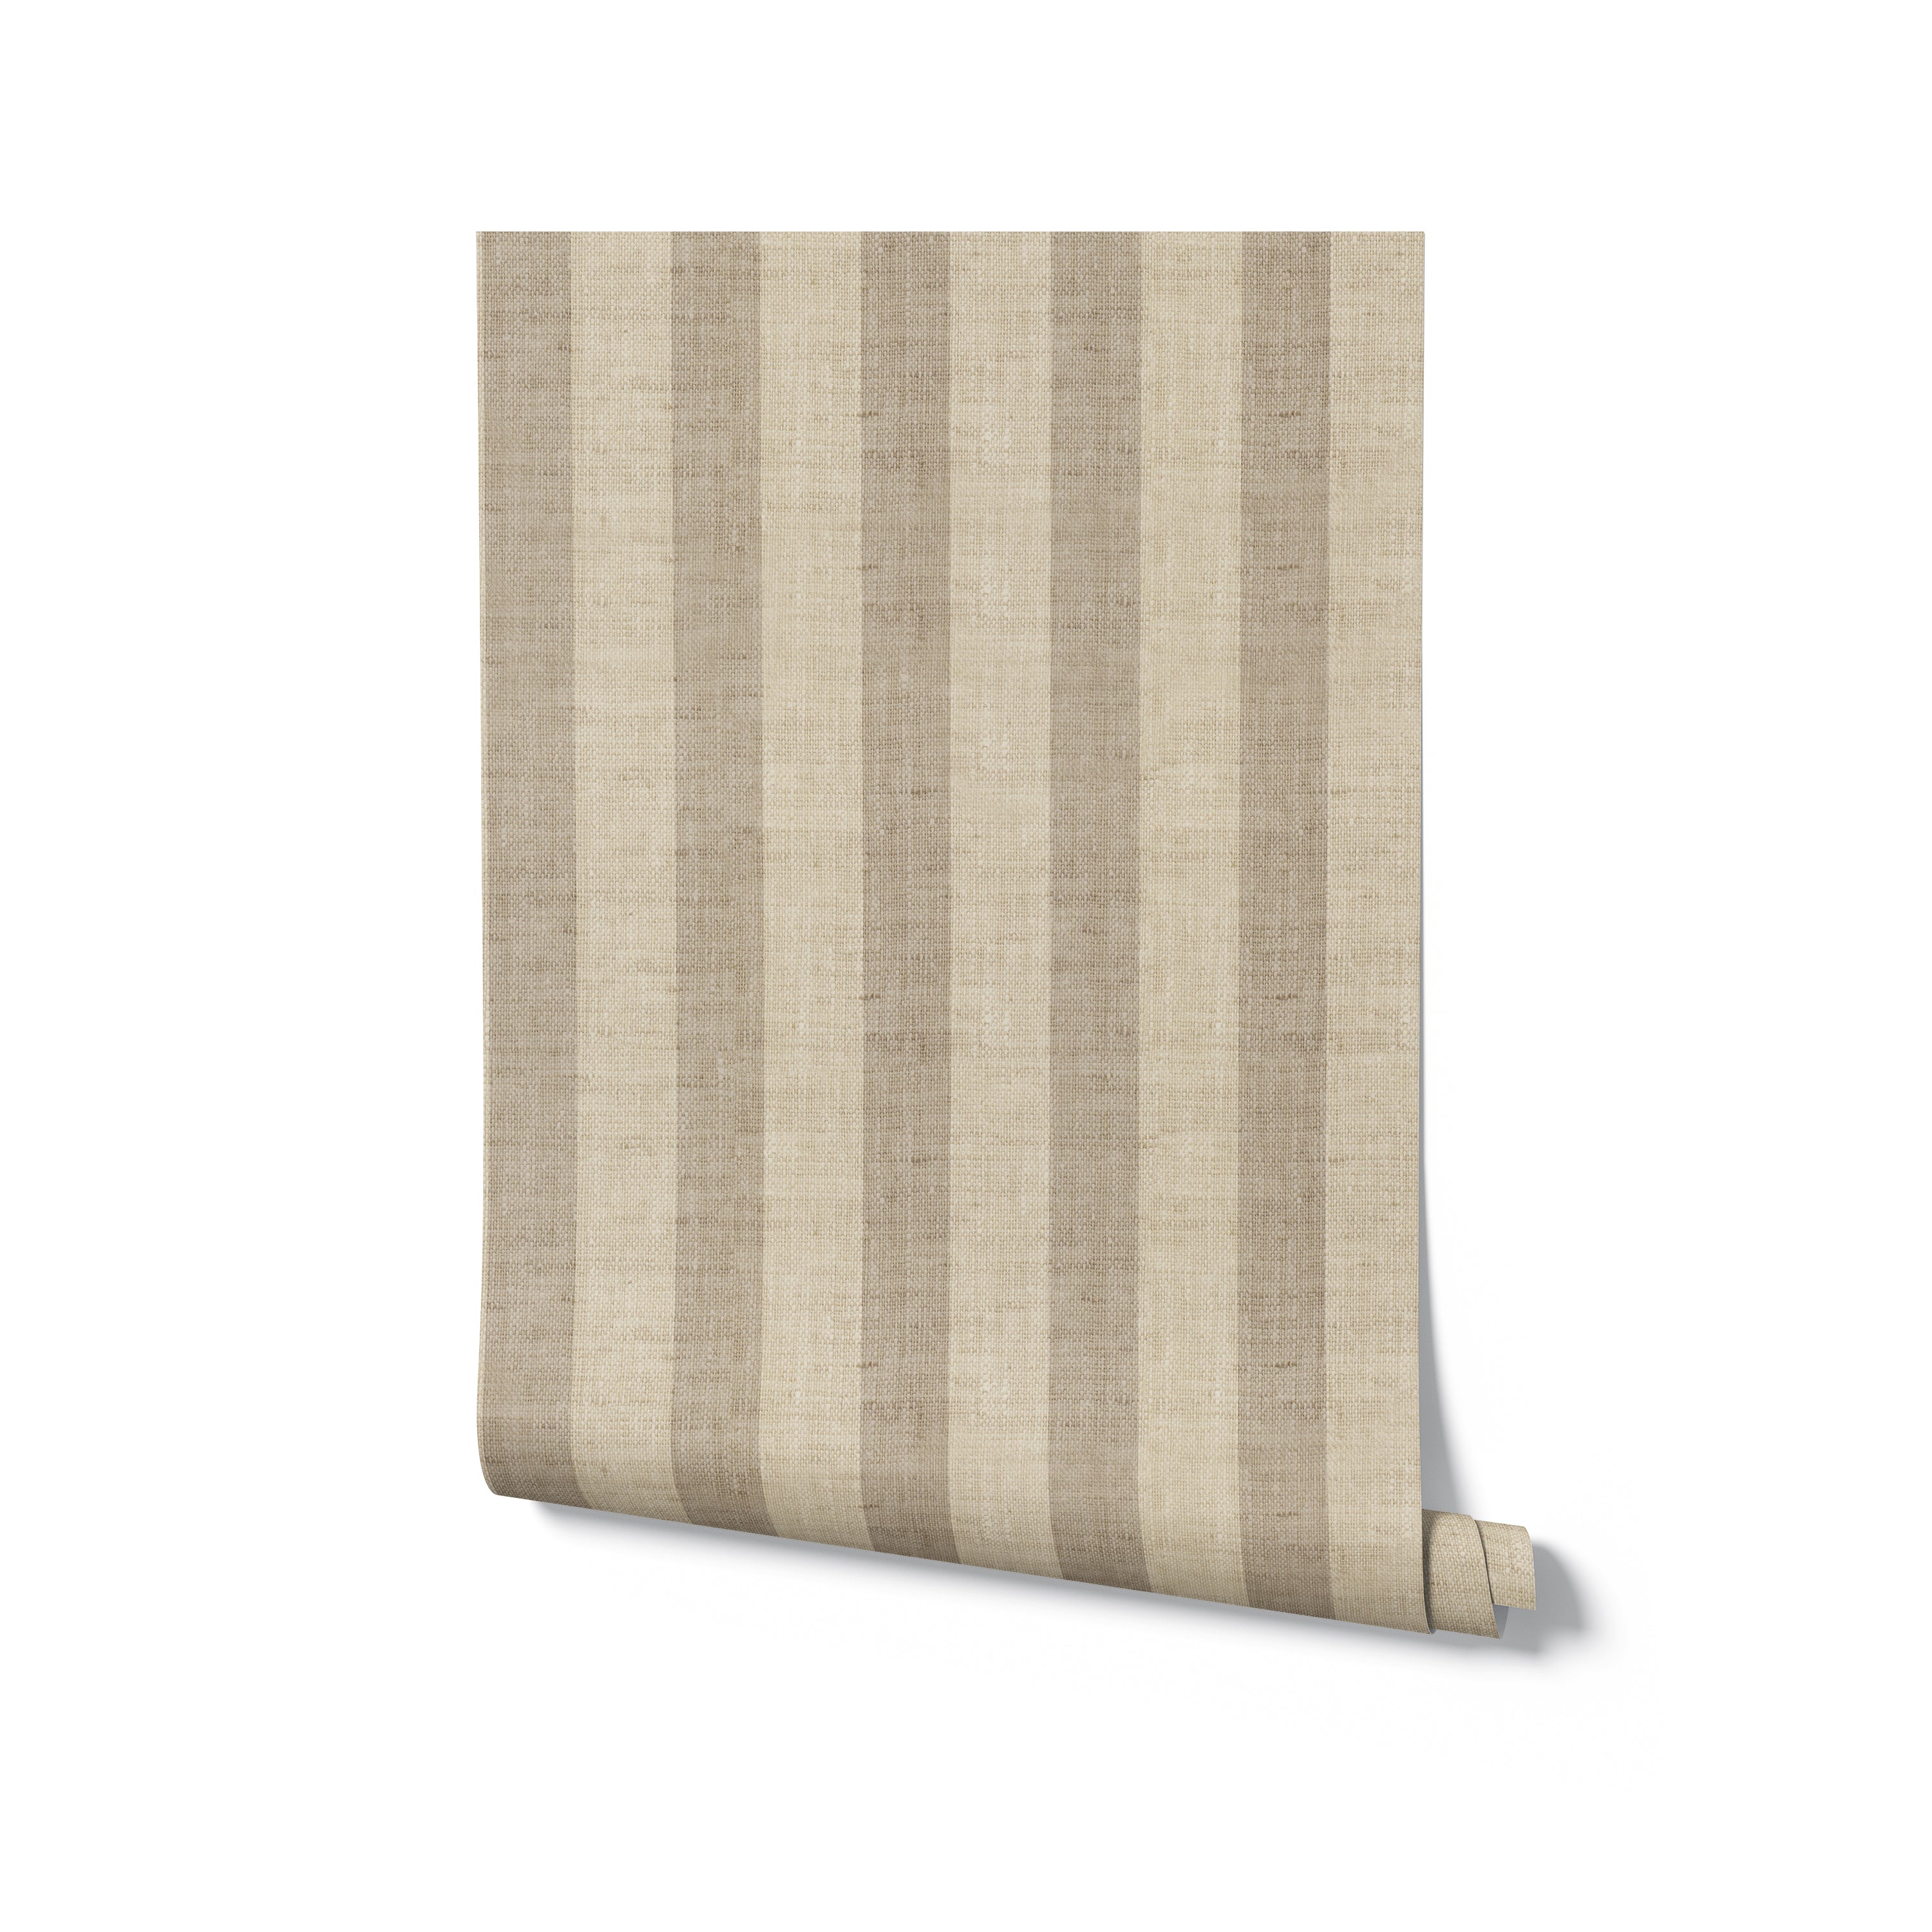 Roll of Classic Striped Wallpaper in a neutral beige, showcased partially unrolled to reveal its timeless striped pattern. This wallpaper offers a sophisticated backdrop, perfect for enhancing the decor of any room with its subtle elegance and warm tones.